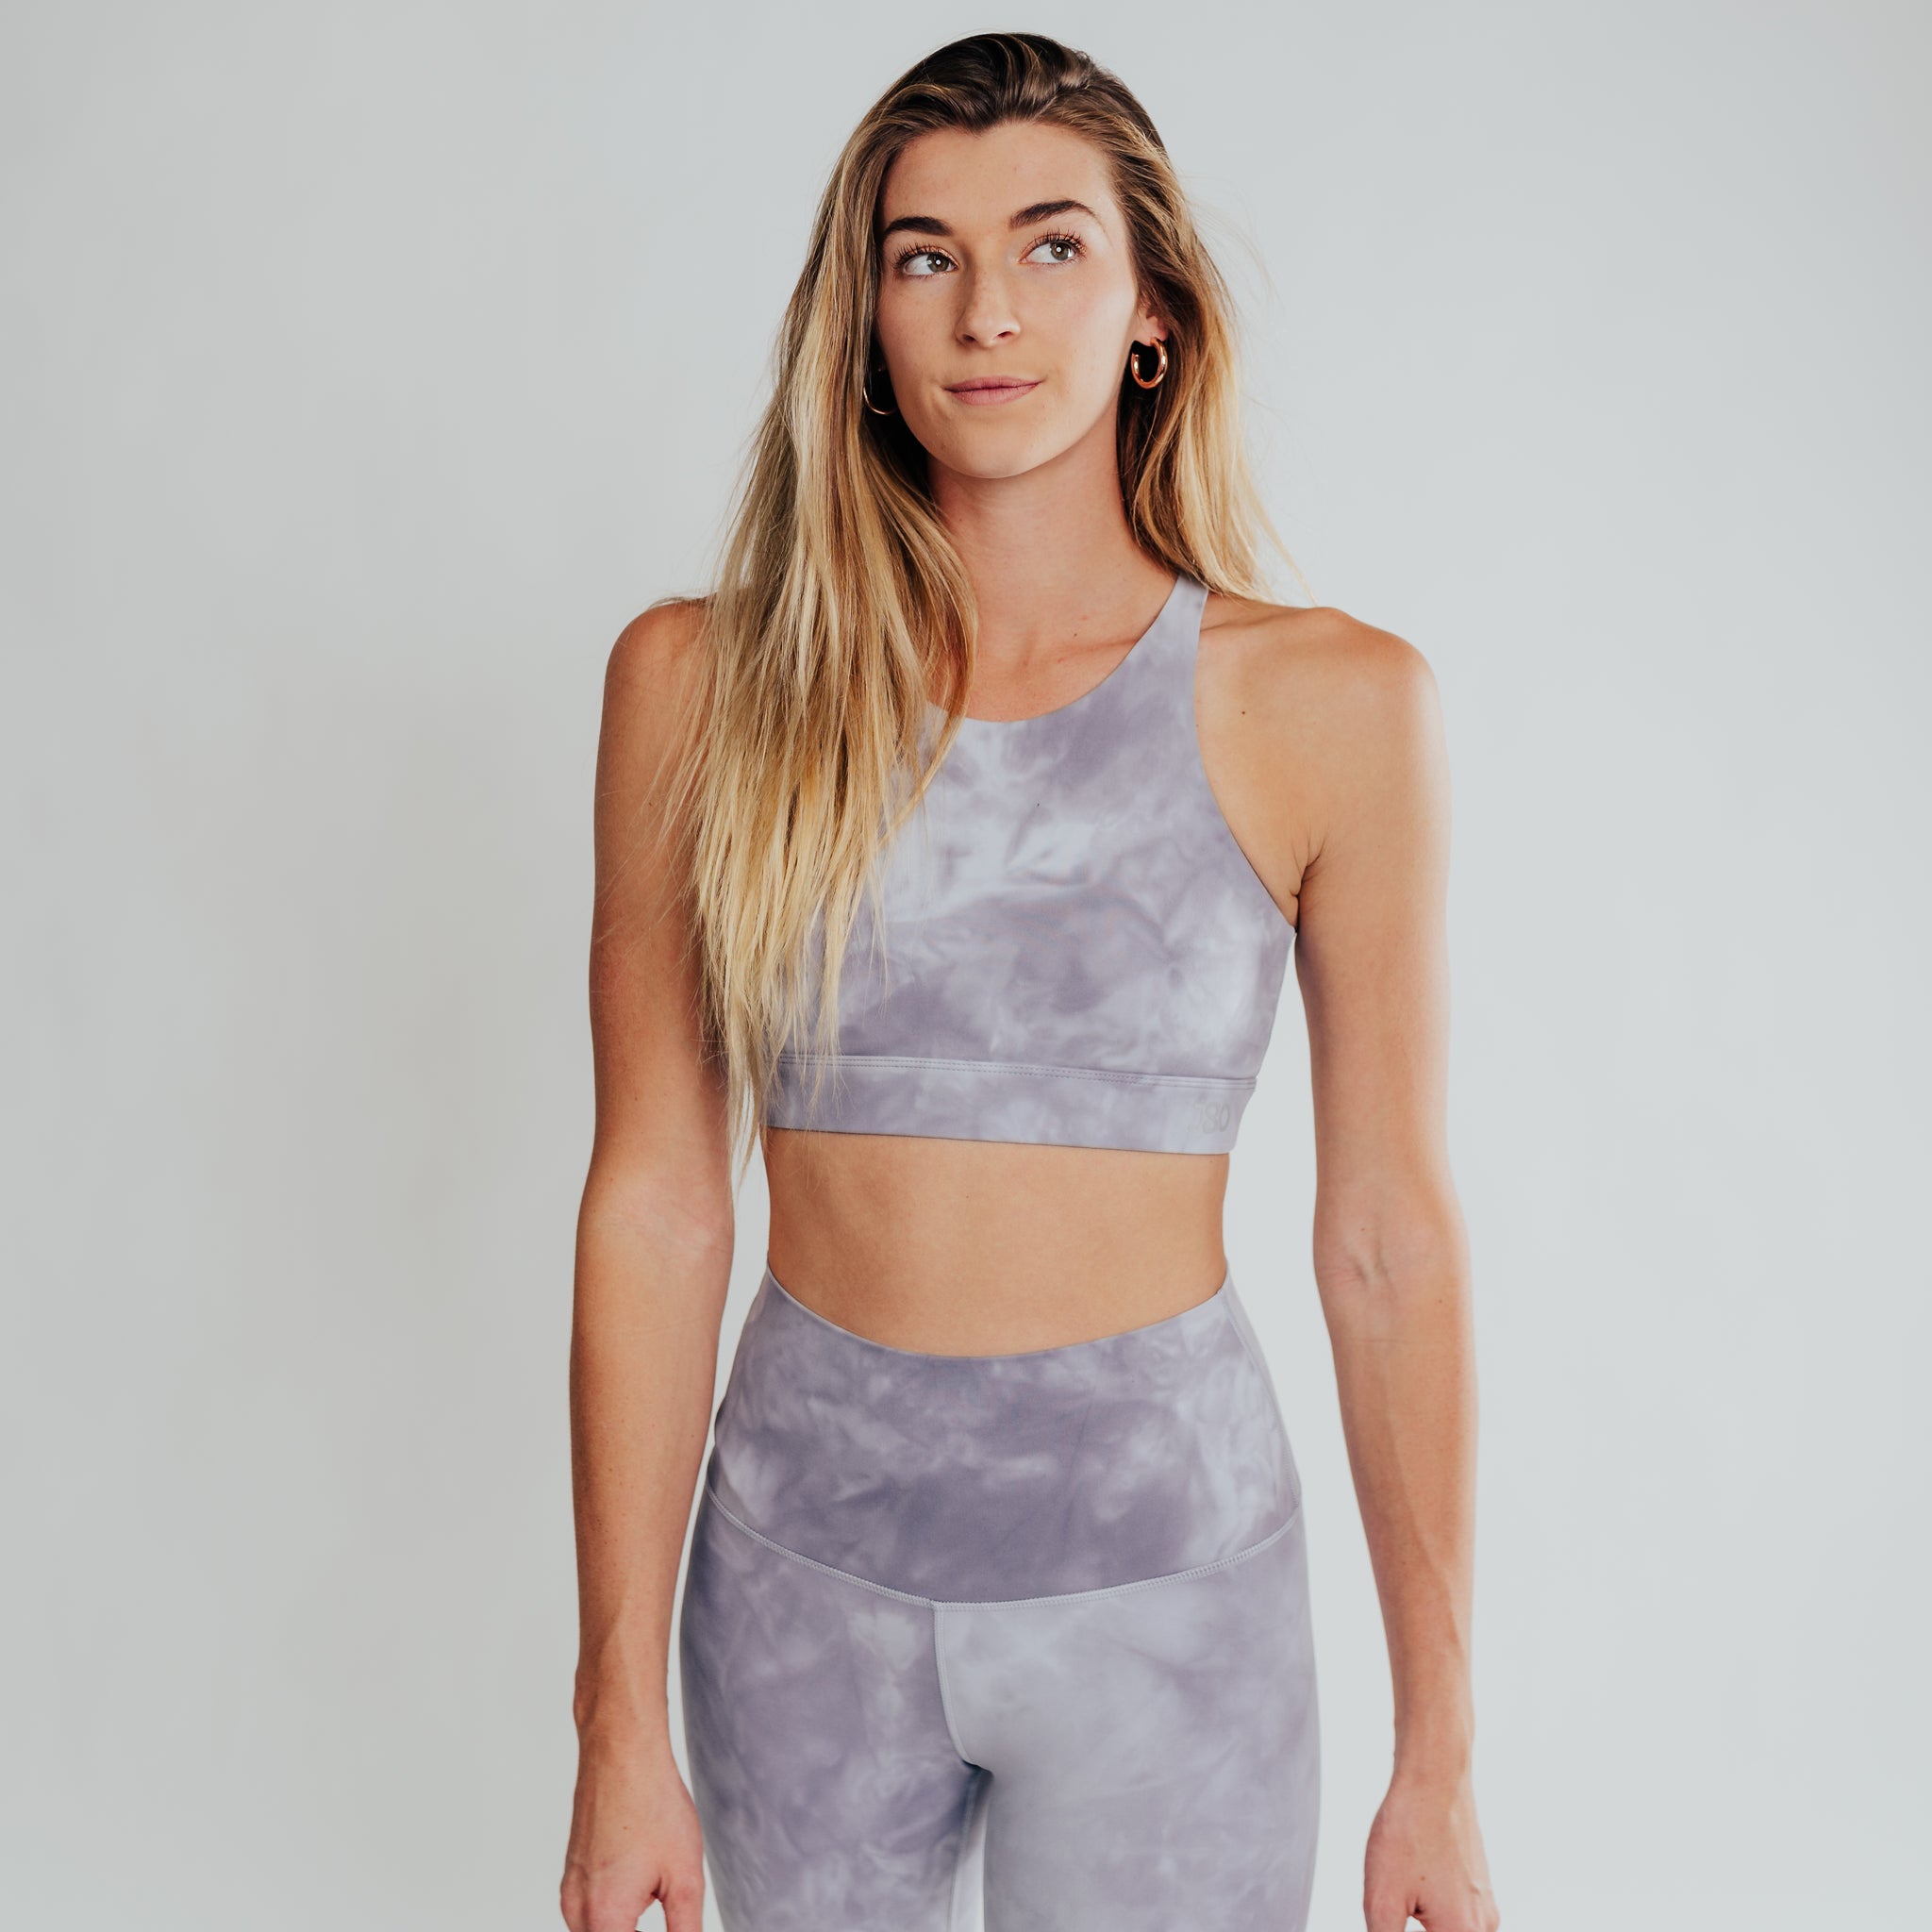 JDEFEG Scrappy Sports Bras Like Hot Cakes Hollow Sport Breathable